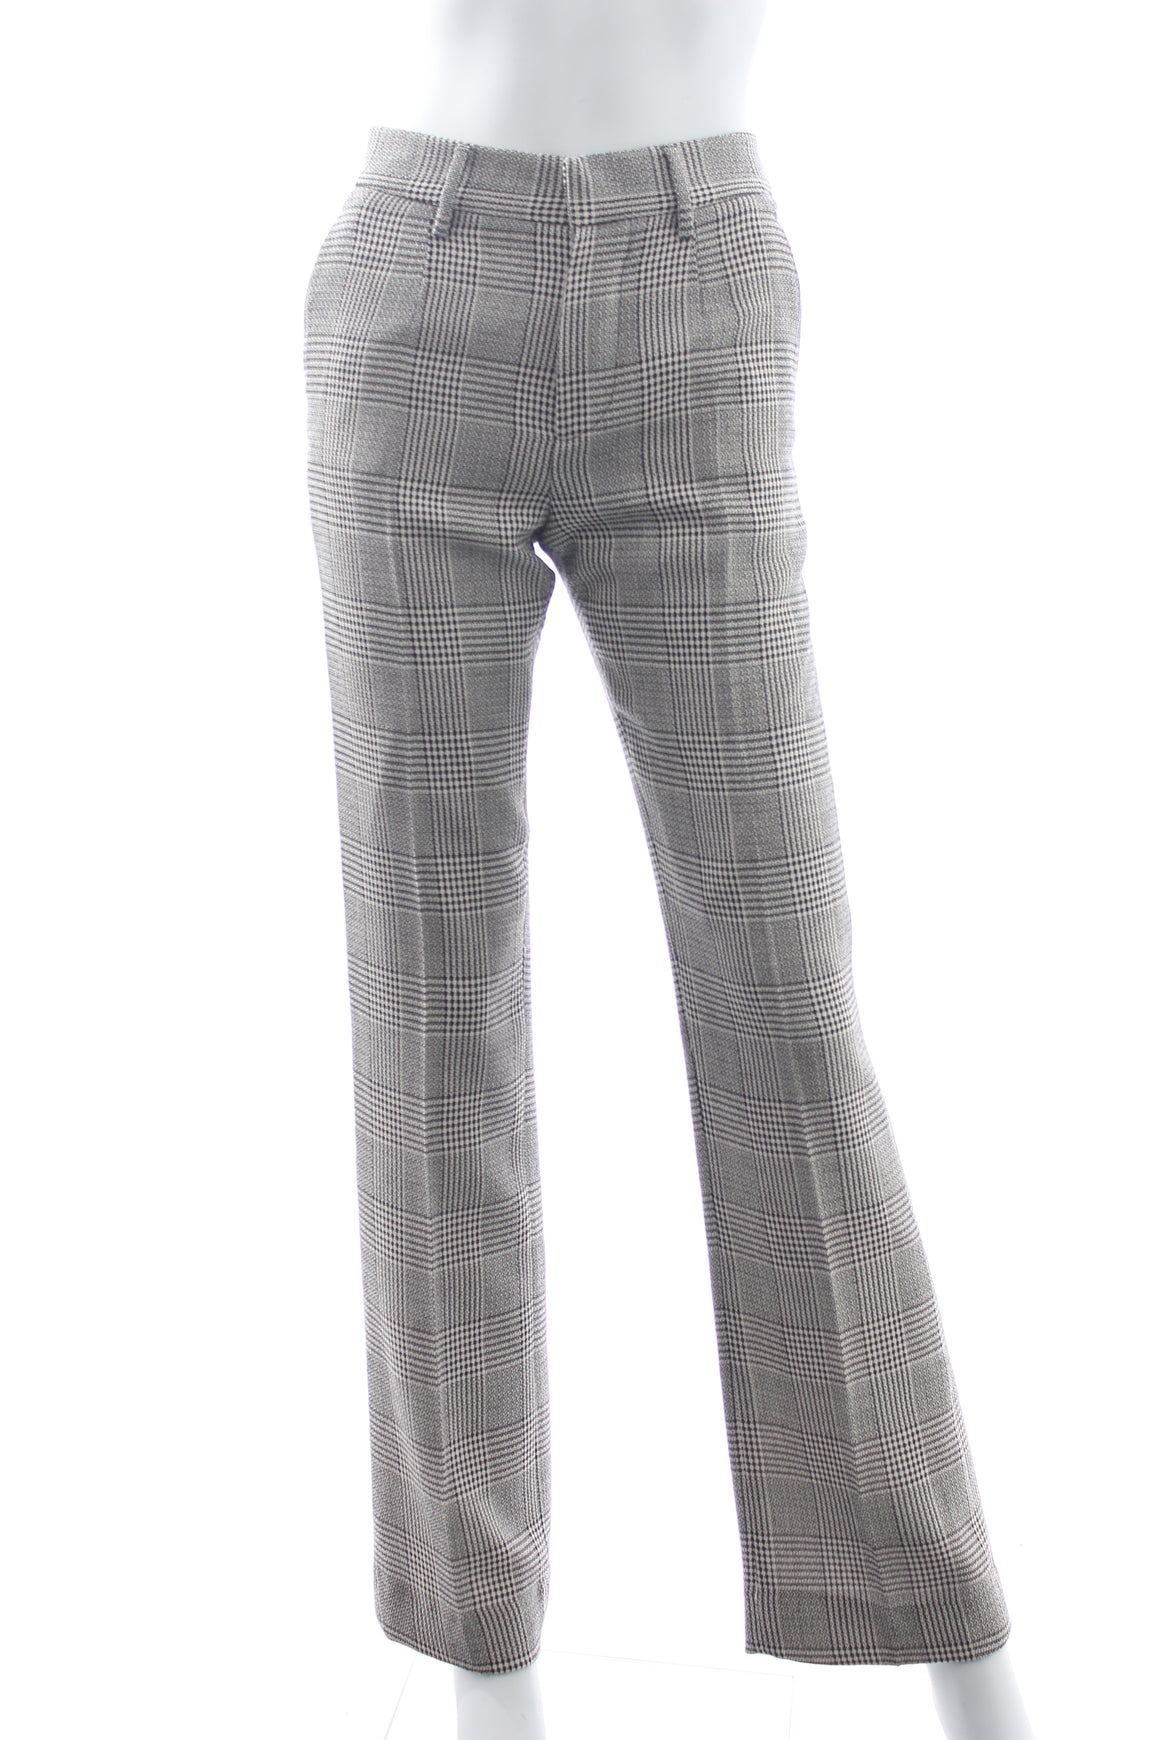 Alessandra Rich Prince of Wales Checked Wool Trousers